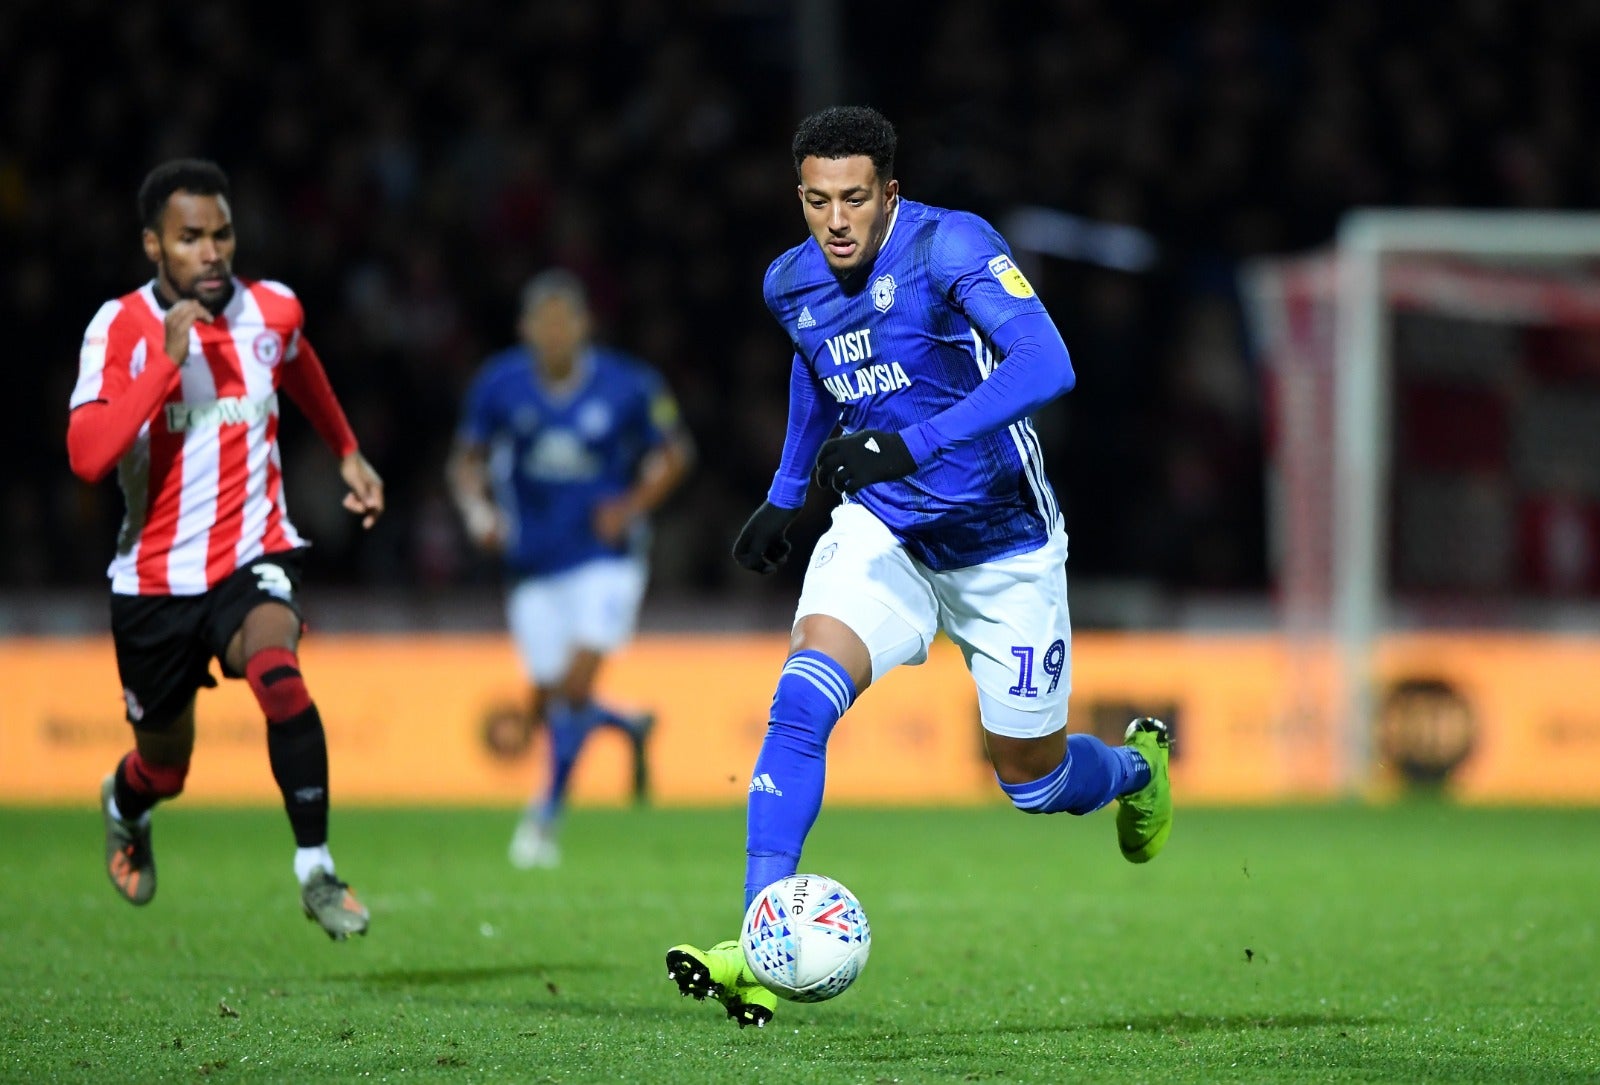 Cardiff have ended Mendez-Laing's contract